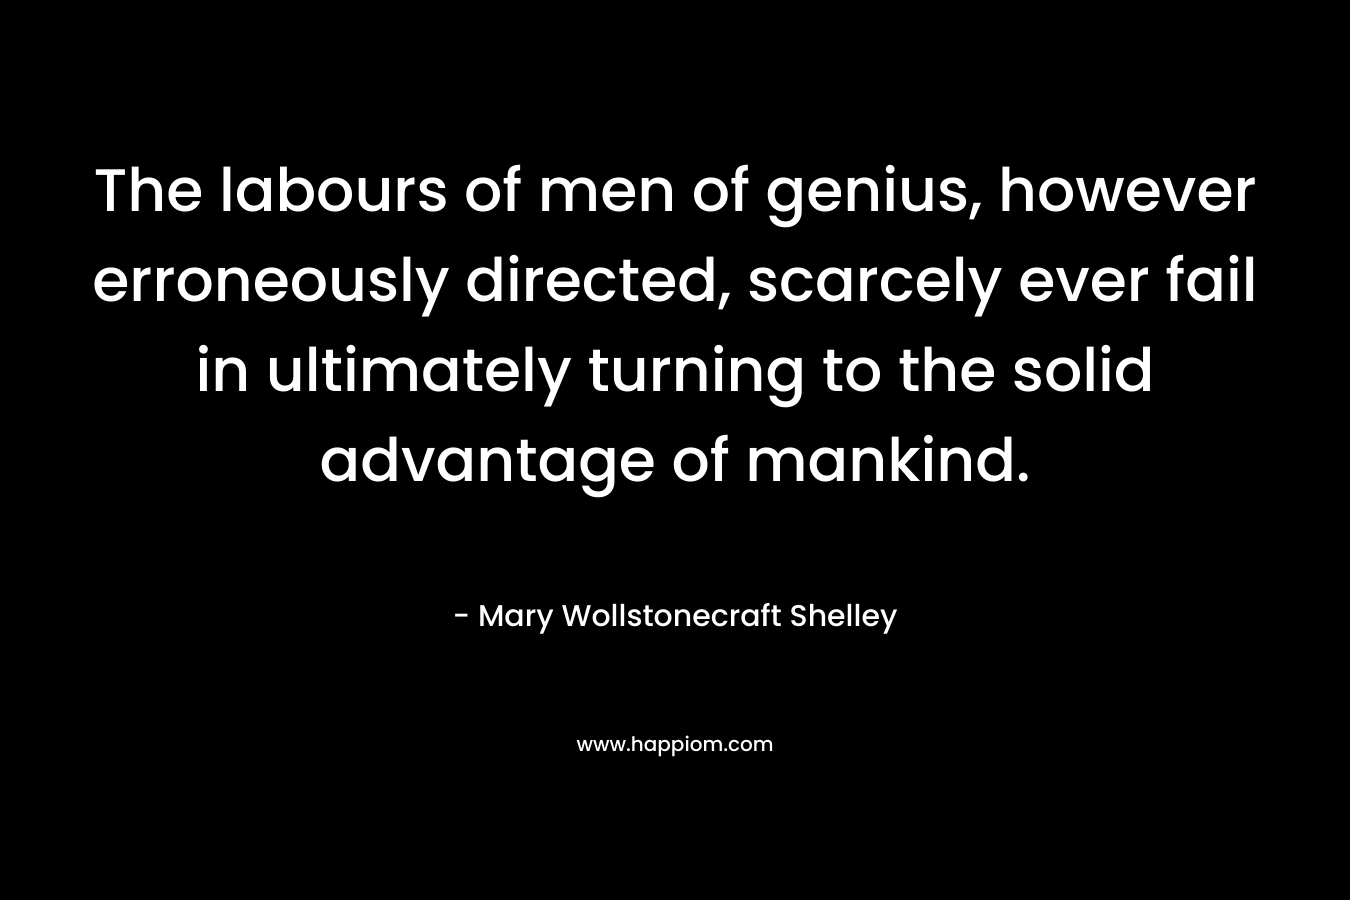 The labours of men of genius, however erroneously directed, scarcely ever fail in ultimately turning to the solid advantage of mankind.